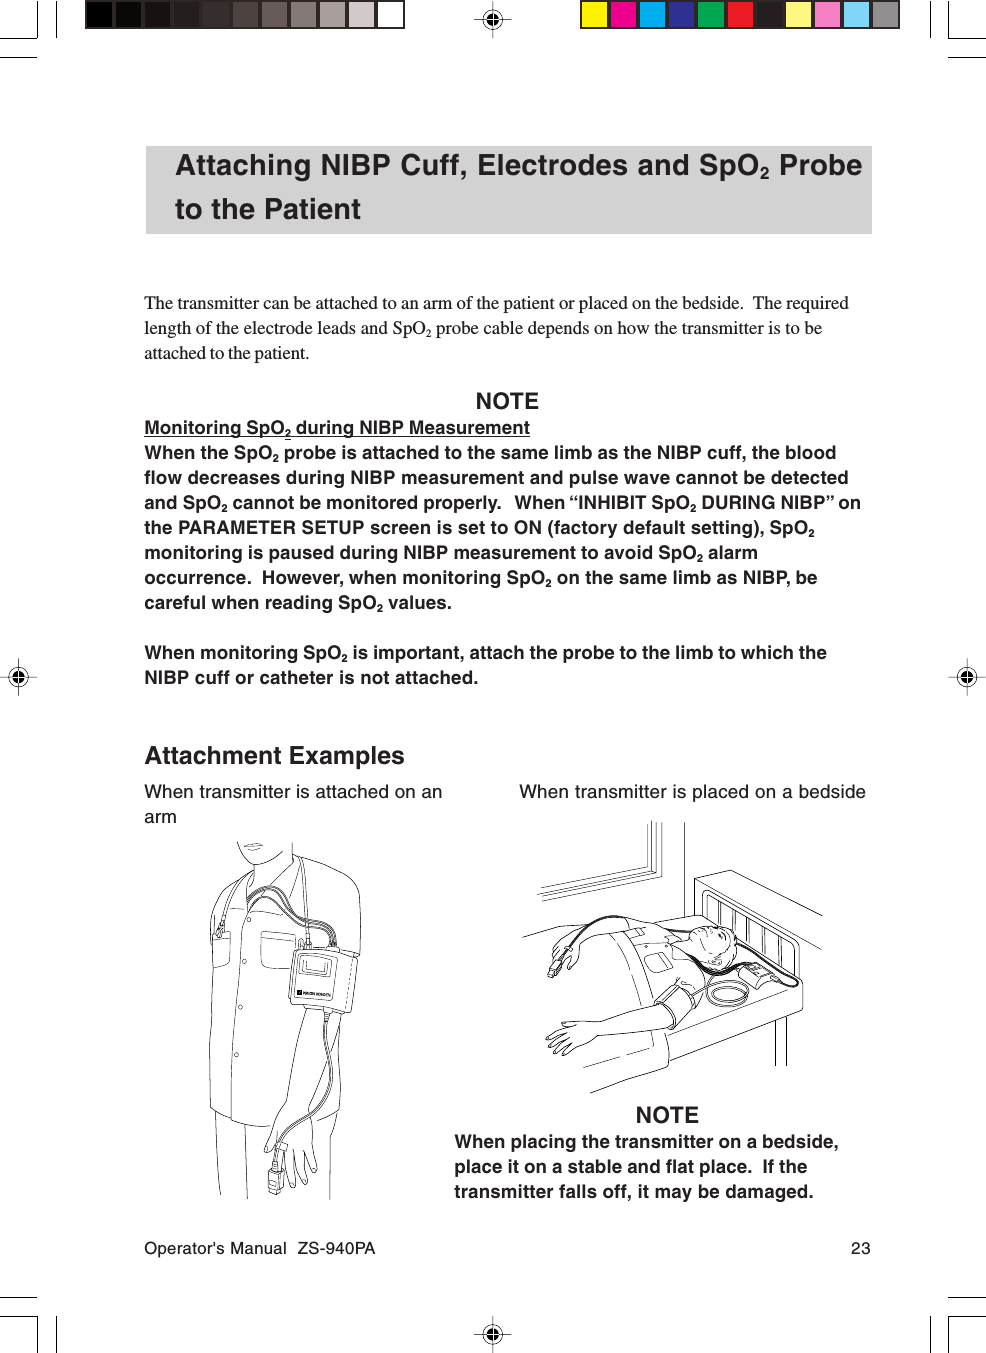 Operator&apos;s Manual  ZS-940PA 23Attaching NIBP Cuff, Electrodes and SpO2 Probeto the PatientThe transmitter can be attached to an arm of the patient or placed on the bedside.  The requiredlength of the electrode leads and SpO2 probe cable depends on how the transmitter is to beattached to the patient.NOTEMonitoring SpO2 during NIBP MeasurementWhen the SpO2 probe is attached to the same limb as the NIBP cuff, the bloodflow decreases during NIBP measurement and pulse wave cannot be detectedand SpO2 cannot be monitored properly.   When “INHIBIT SpO2 DURING NIBP” onthe PARAMETER SETUP screen is set to ON (factory default setting), SpO2monitoring is paused during NIBP measurement to avoid SpO2 alarmoccurrence.  However, when monitoring SpO2 on the same limb as NIBP, becareful when reading SpO2 values.When monitoring SpO2 is important, attach the probe to the limb to which theNIBP cuff or catheter is not attached.Attachment ExamplesWhen transmitter is attached on anarmWhen transmitter is placed on a bedsideNOTEWhen placing the transmitter on a bedside,place it on a stable and flat place.  If thetransmitter falls off, it may be damaged.